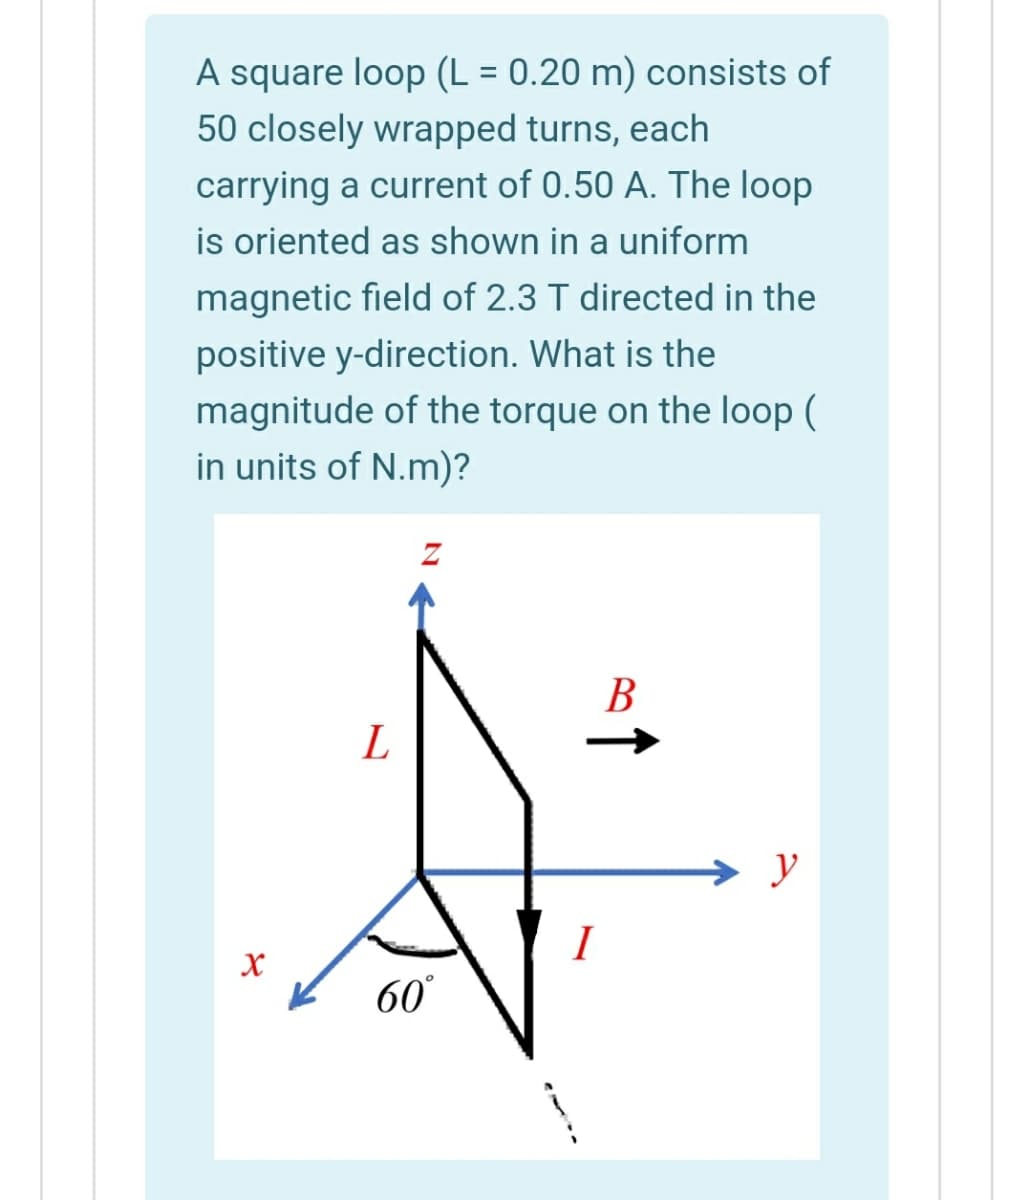 A square loop (L = 0.20 m) consists of
50 closely wrapped turns, each
carrying a current of 0.50 A. The loop
is oriented as shown in a uniform
magnetic field of 2.3 T directed in the
positive y-direction. What is the
magnitude of the torque on the loop (
in units of N.m)?
В
L
→ y
I
60
